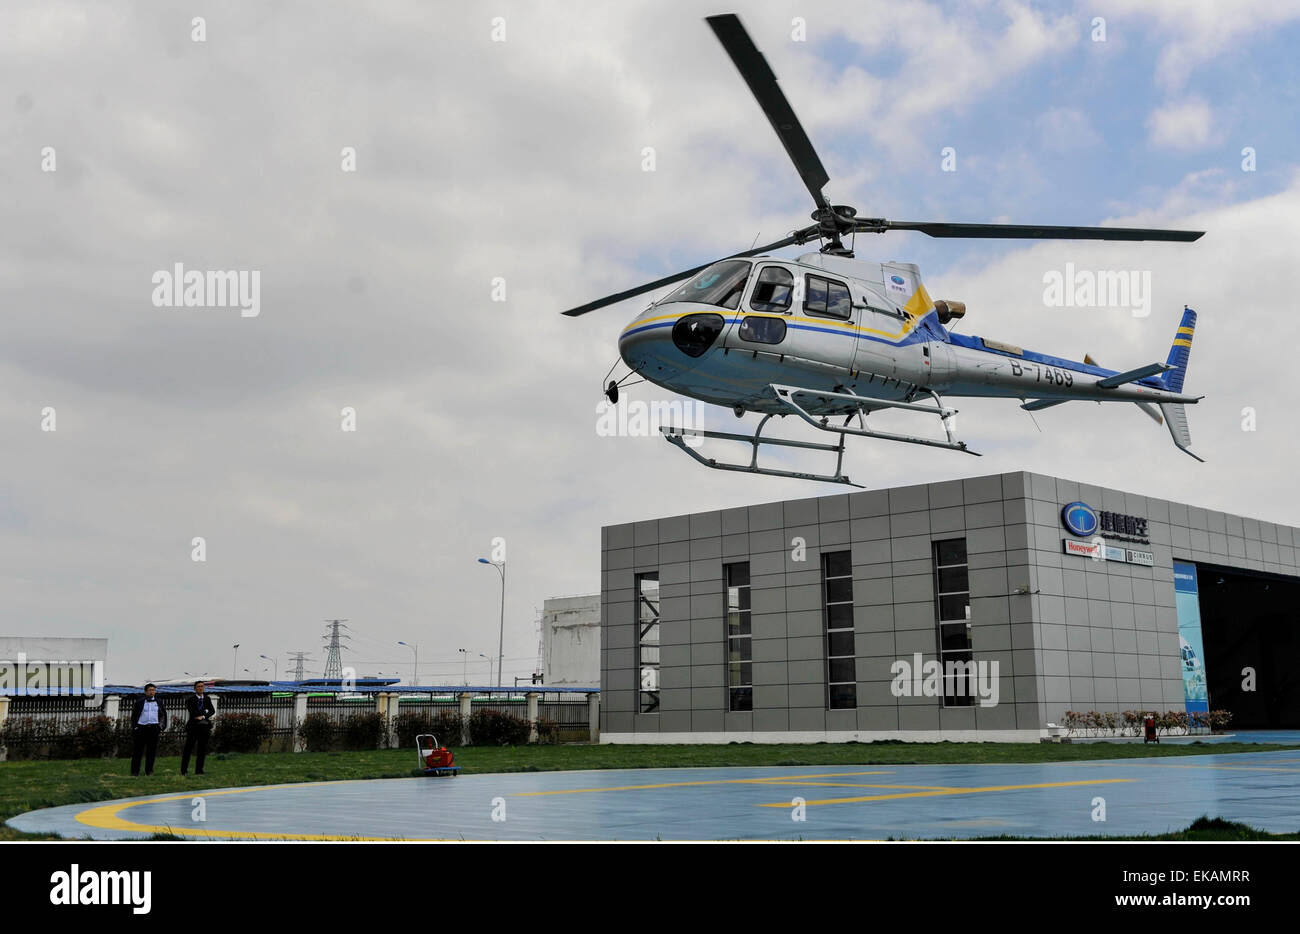 Ningbo. 9th Apr, 2015. A helicopter flies in a demonstration flight at a helicopter store in Ningbo, east China's Zhejiang Province, April 8, 2015. The helicopter store was open on Wednesday. Credit:  Xinhua/Alamy Live News Stock Photo